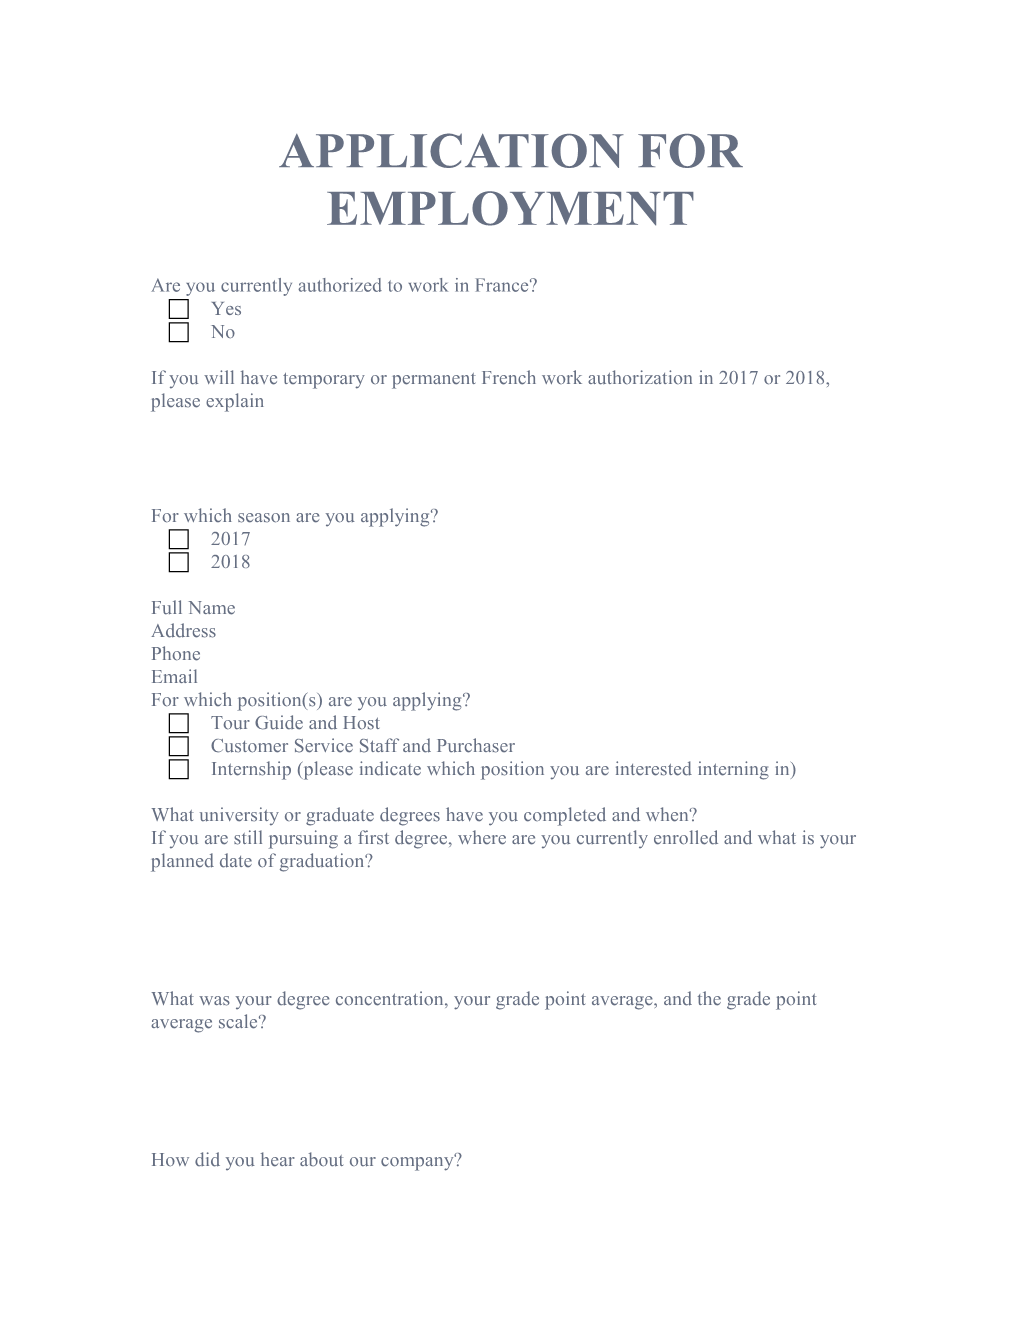 Application for Employment s64